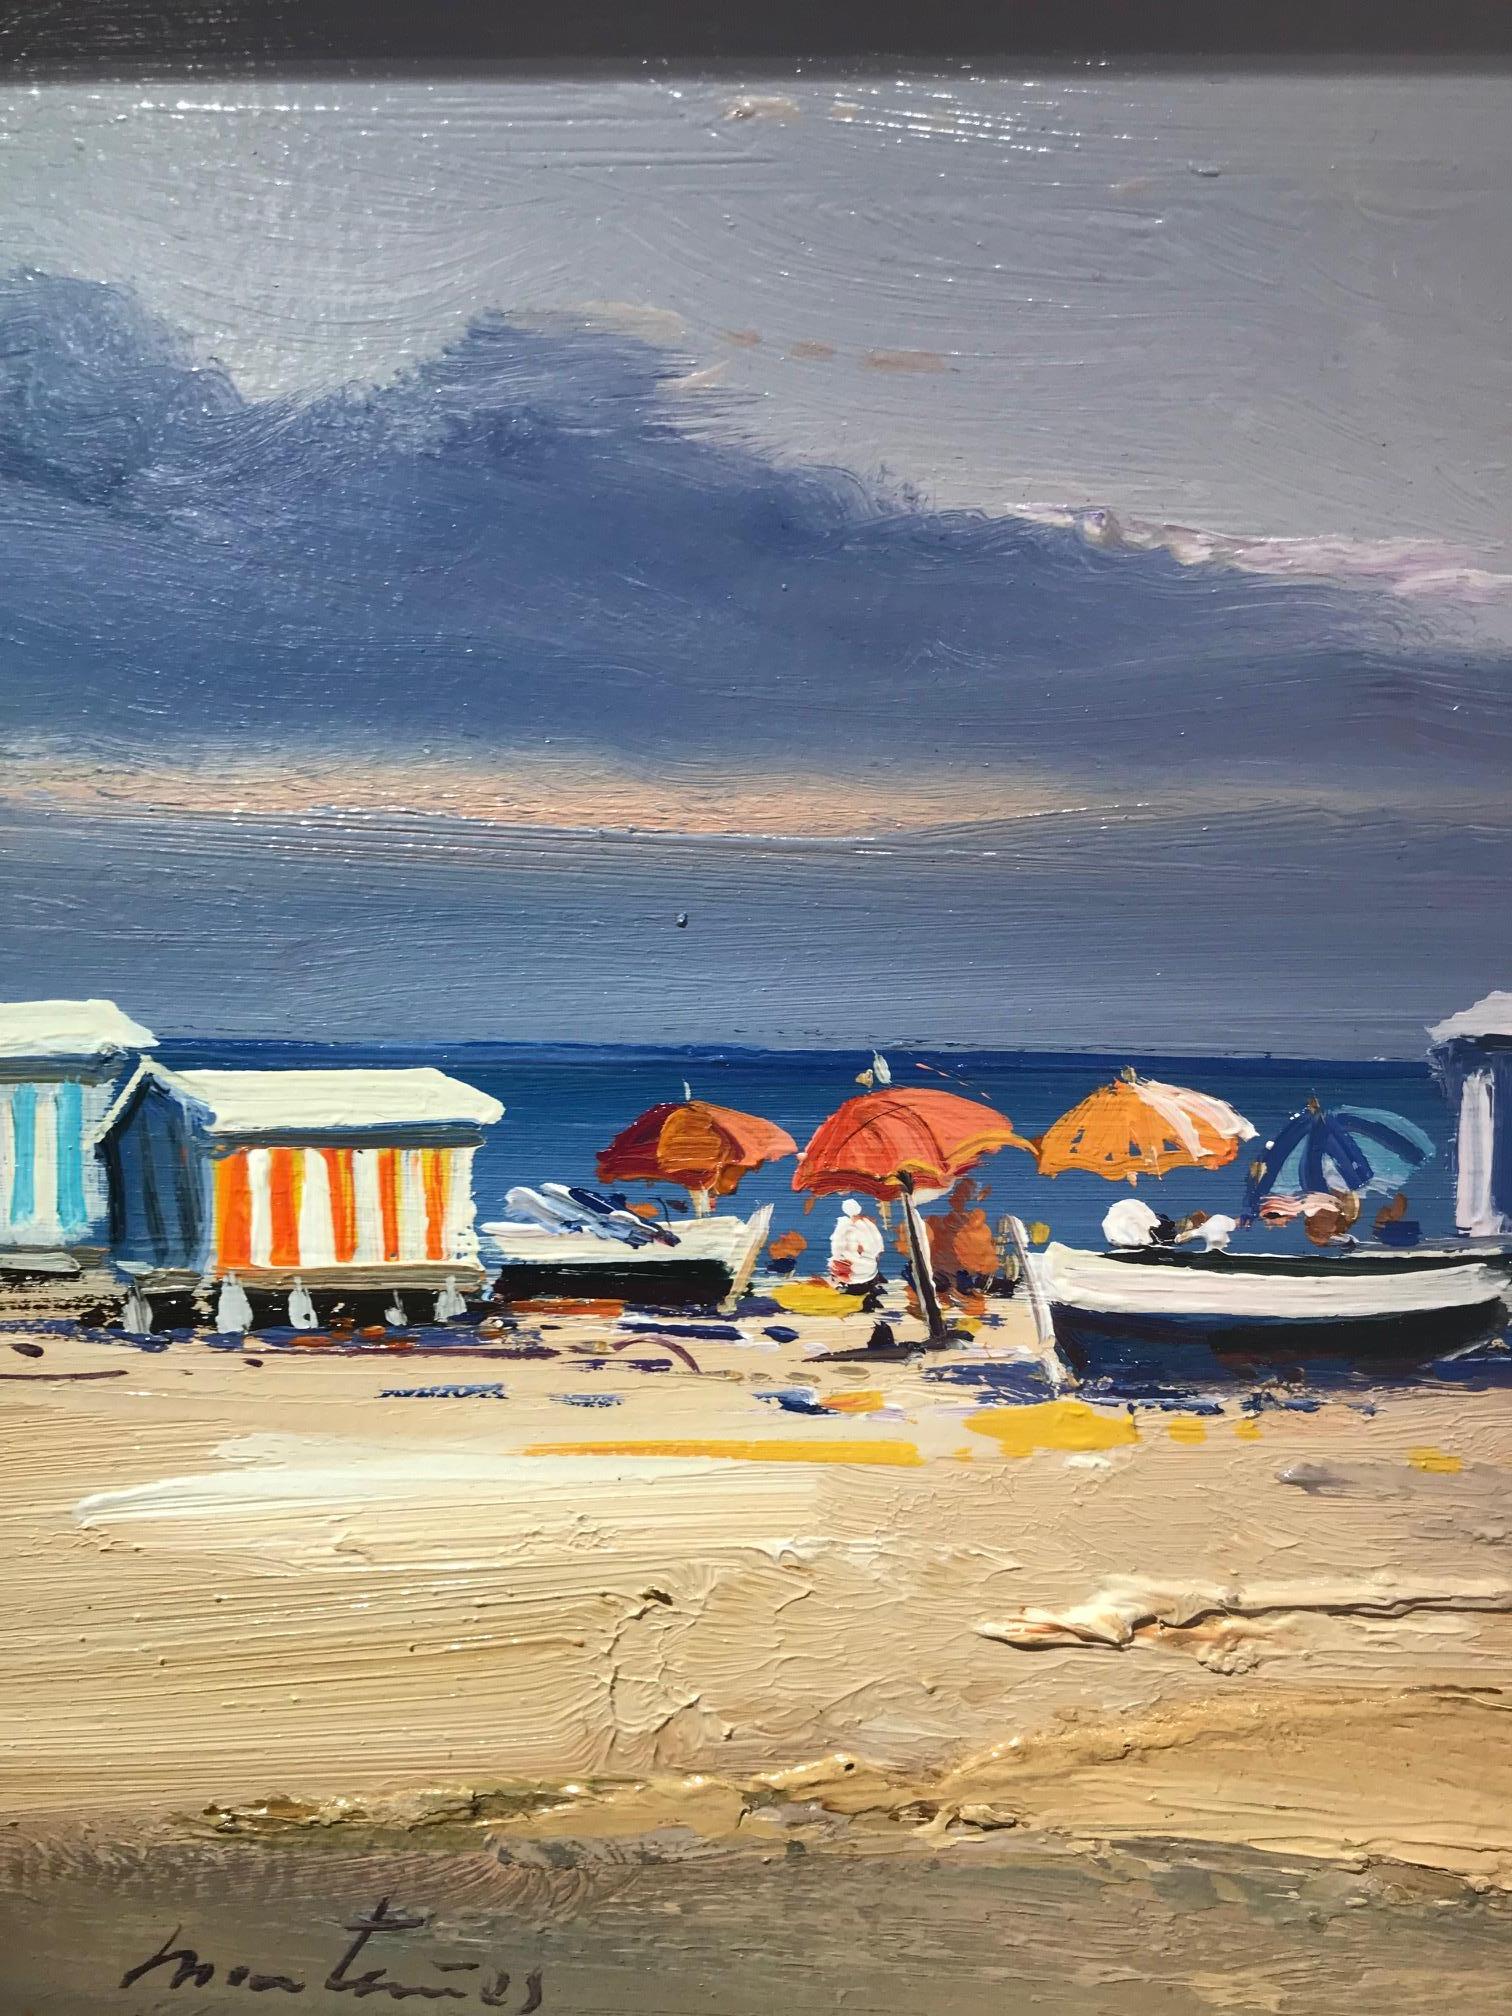 Contemporary Vivid Blue Seascape & Beach Scene 'Beach Day', blues, pinks, yellow For Sale 1